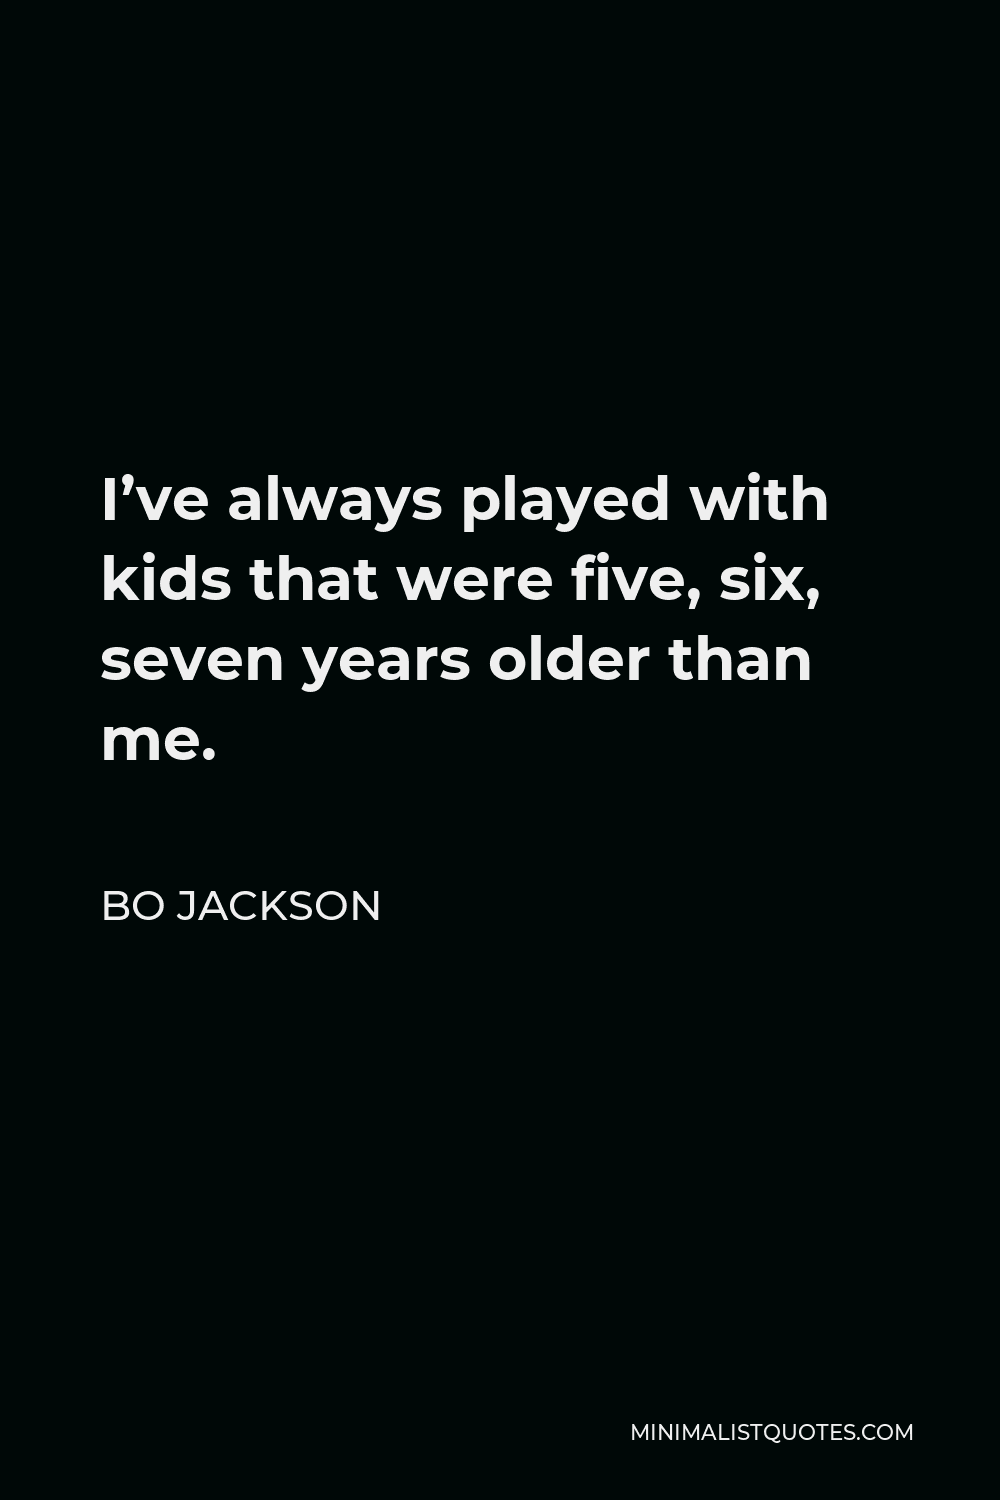 Bo Jackson Quote - I’ve always played with kids that were five, six, seven years older than me.